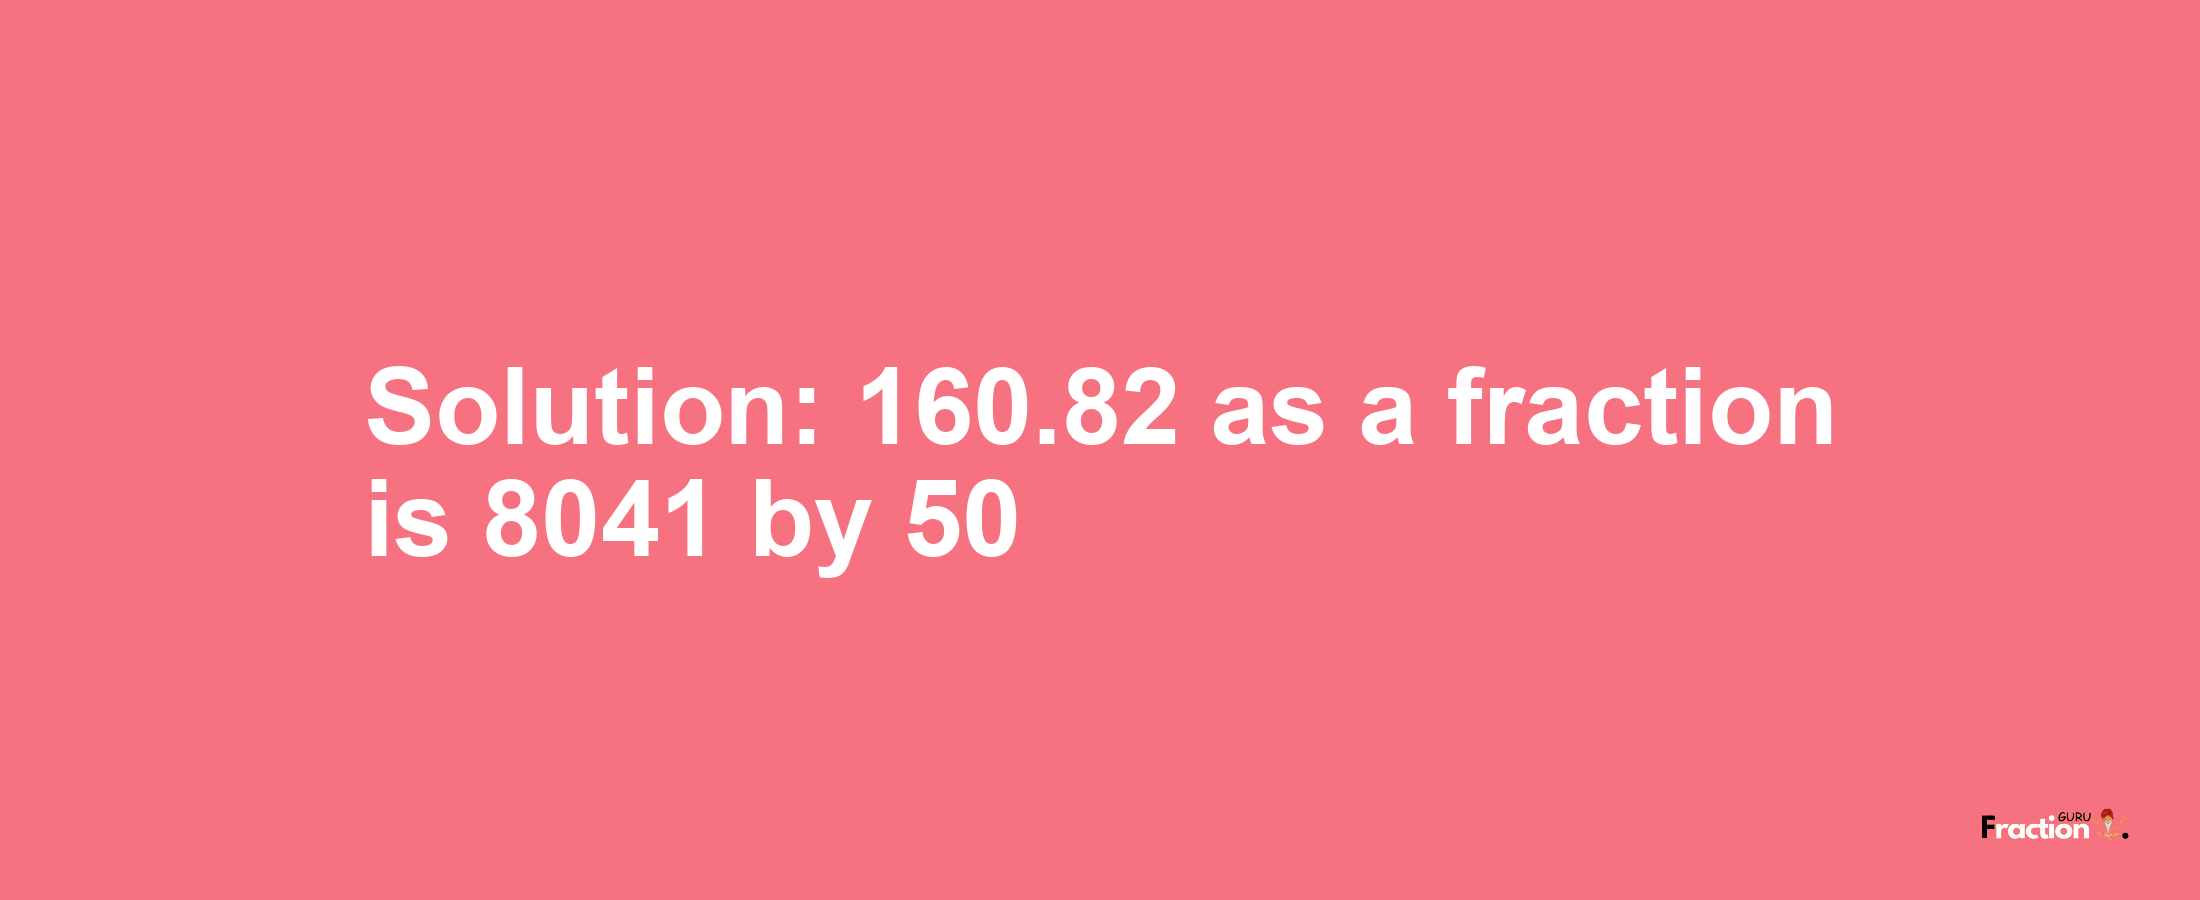 Solution:160.82 as a fraction is 8041/50